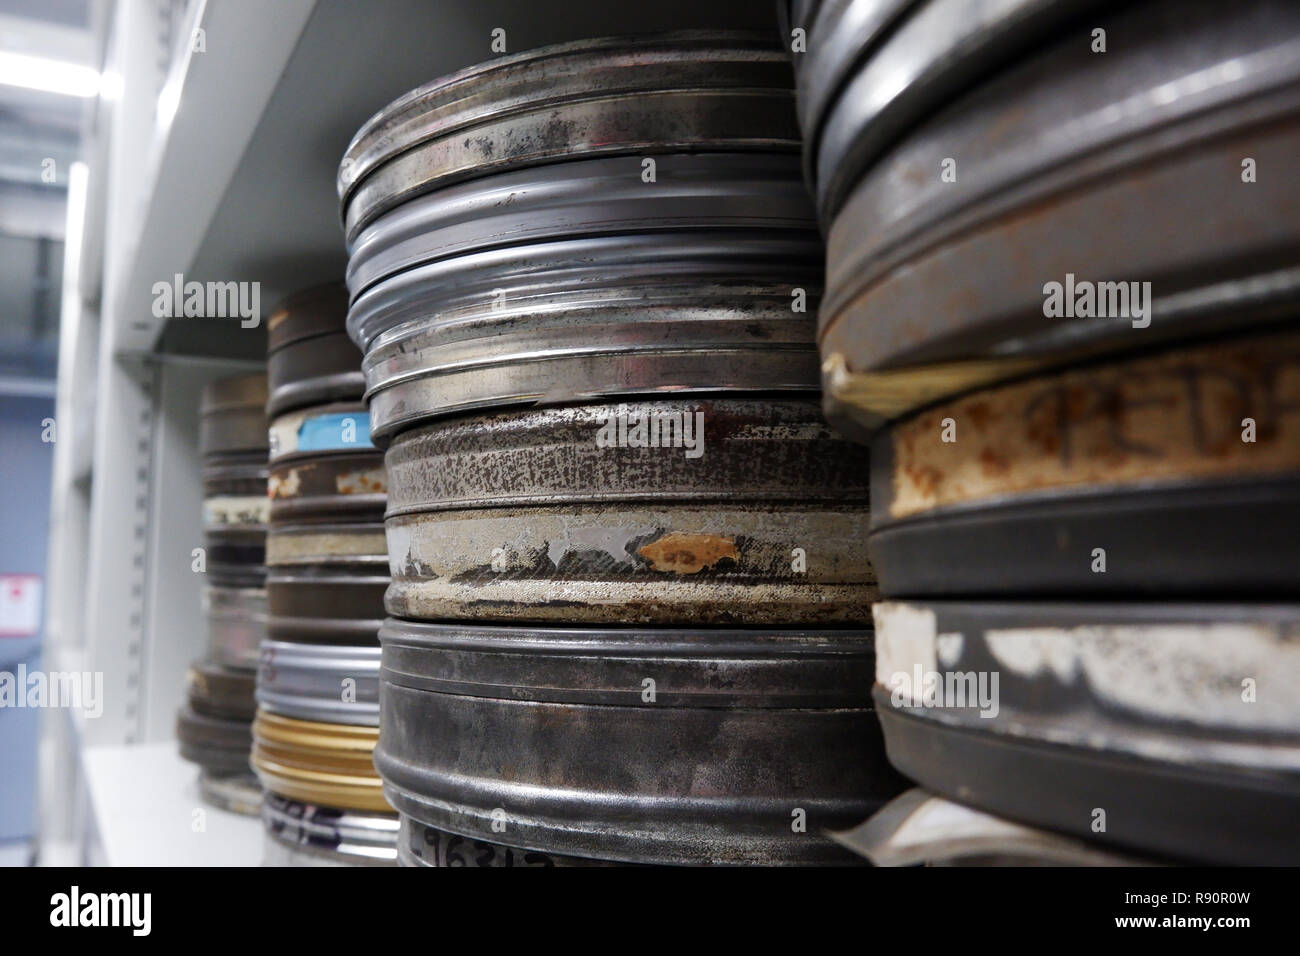 Movie Trailers in Metal Film Cans Stock Image - Image of curly